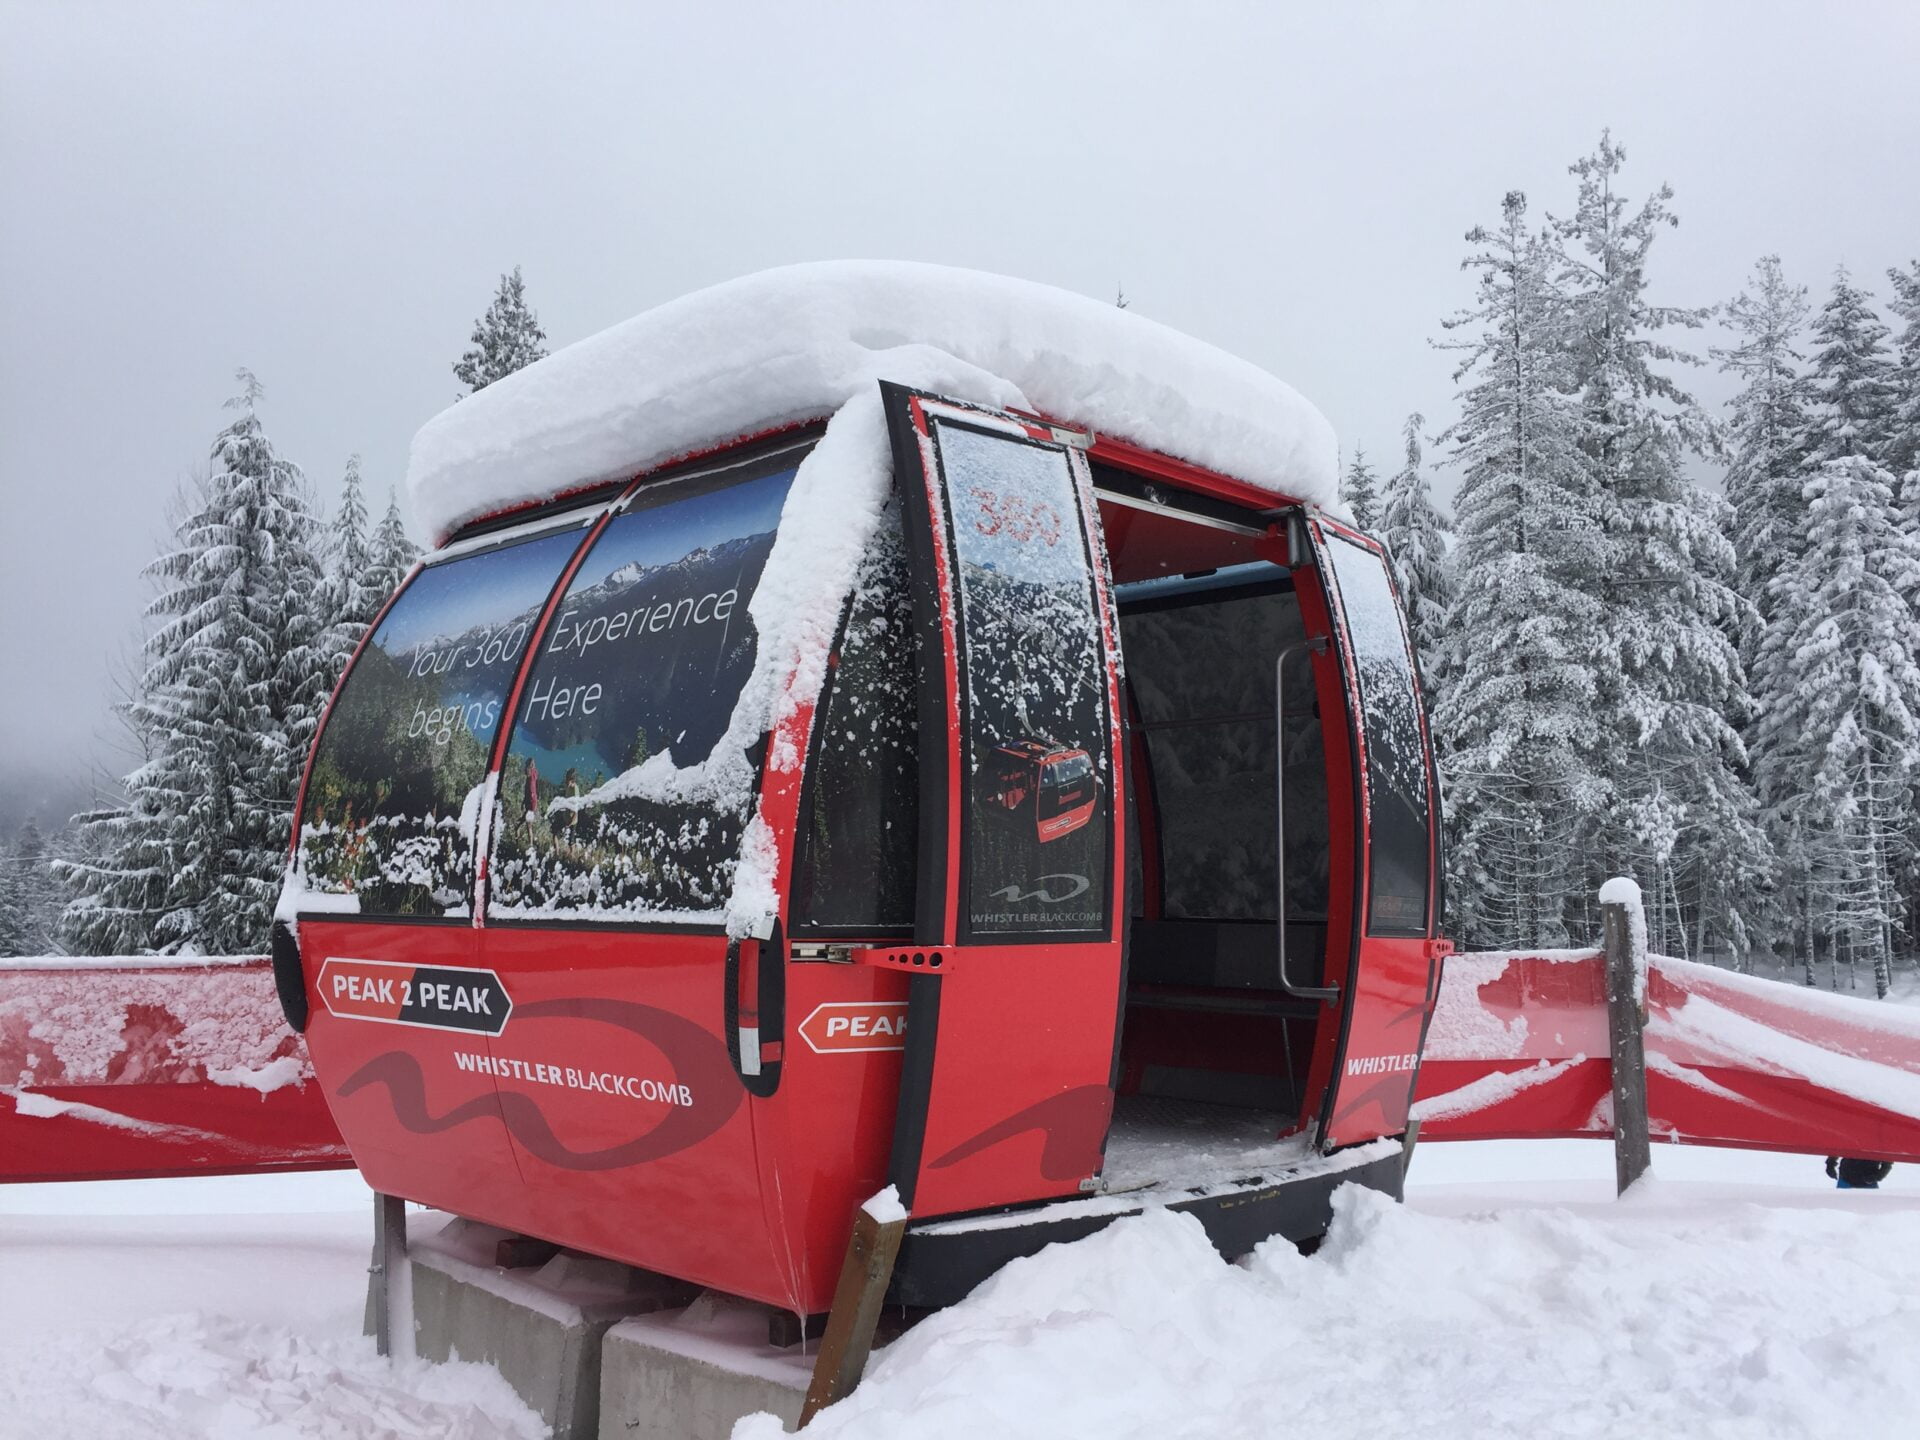 gondola at whistler part of the Best Ski Vacation Deals in British Columbia